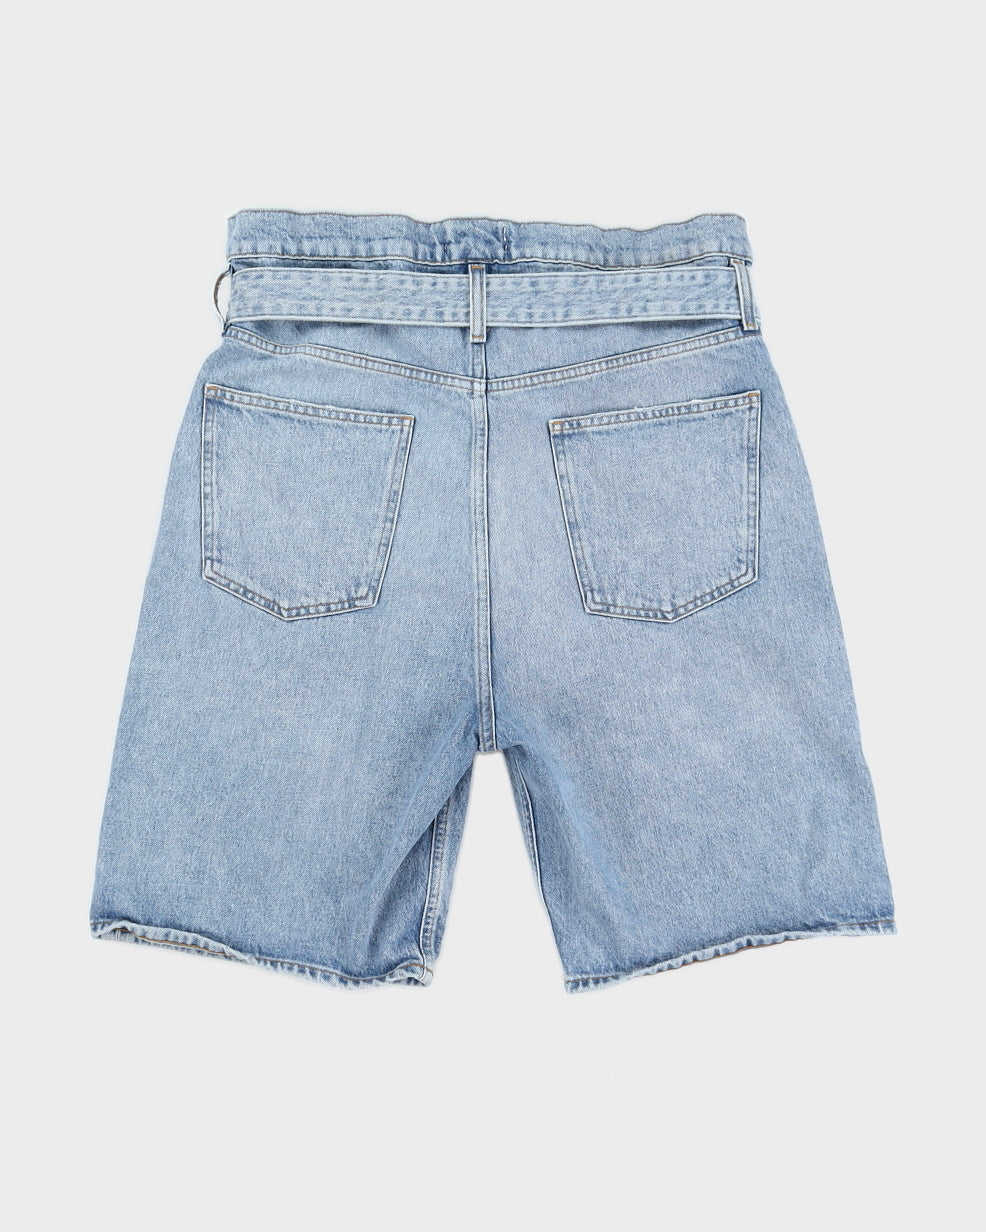 Agolde Pleated Belted Jean Shorts - S